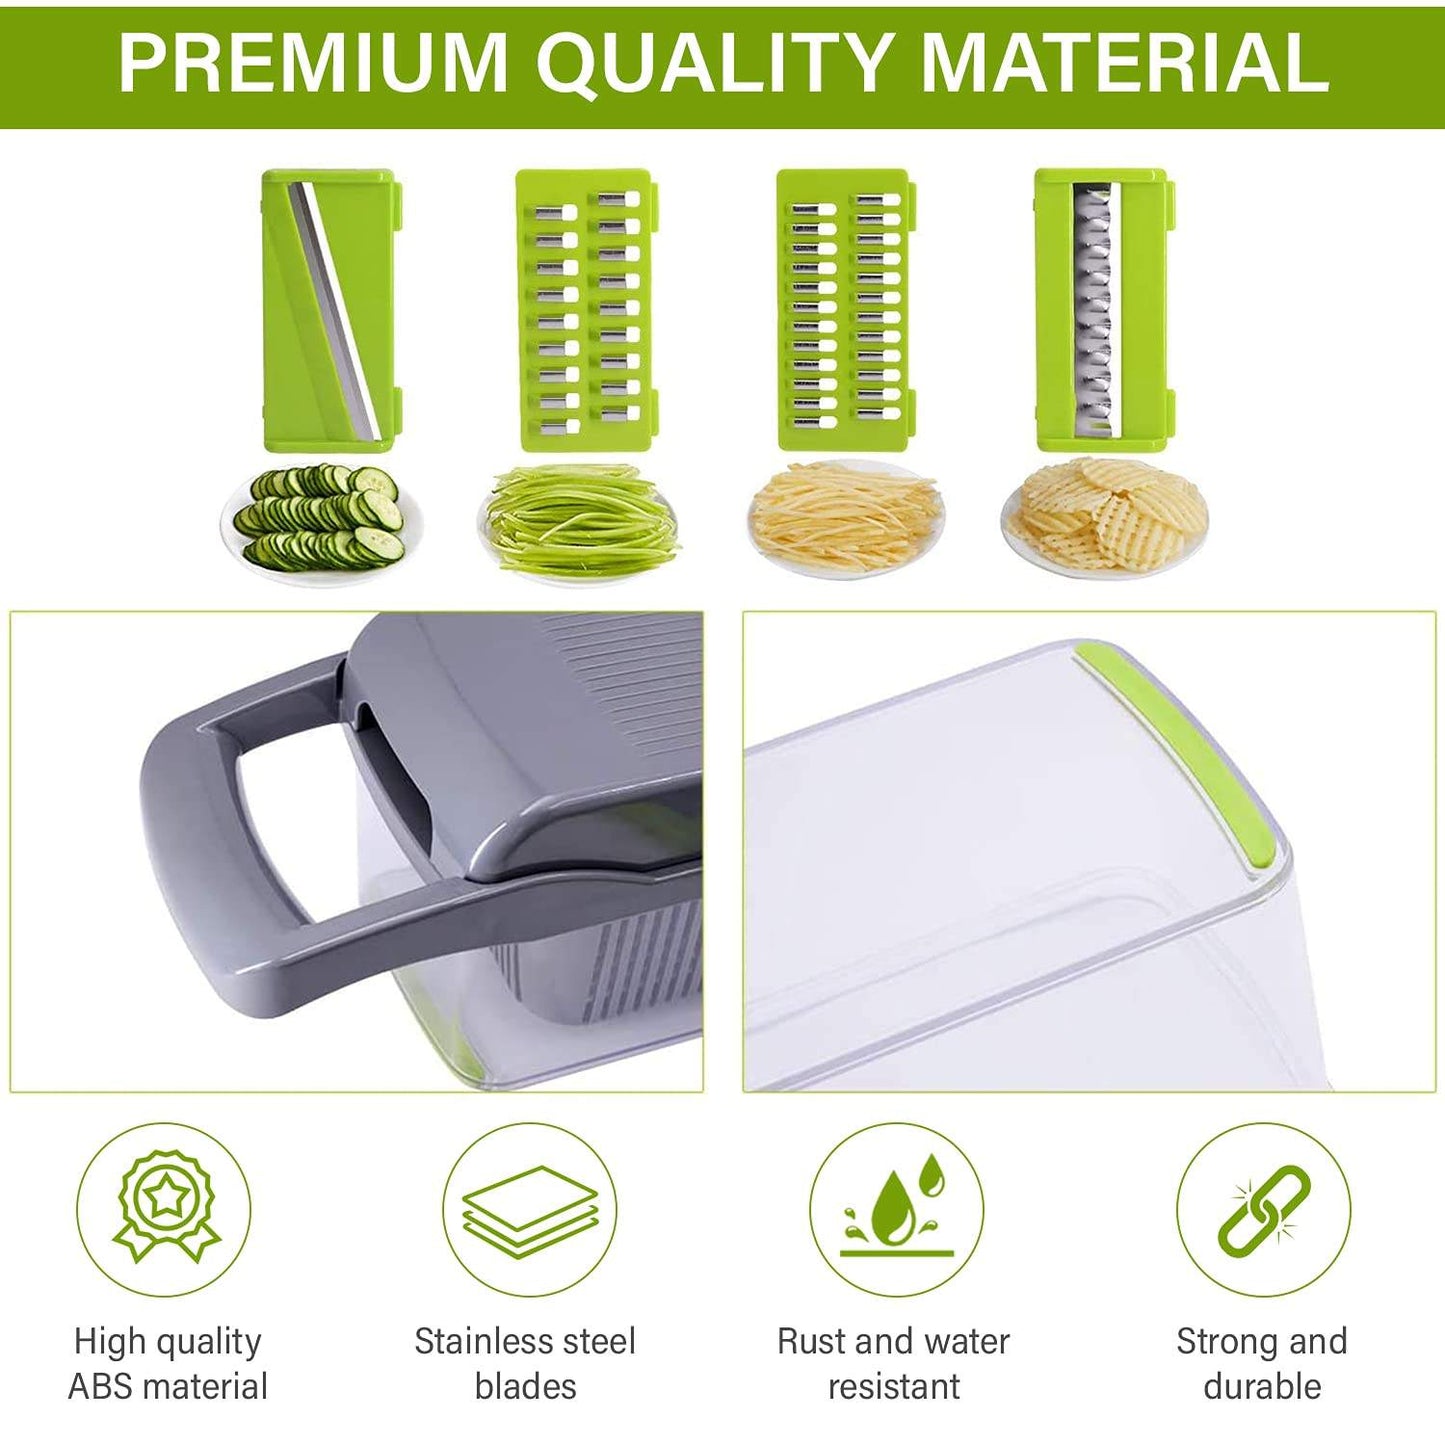 12 In 1 Manual Vegetable Chopper Kitchen Gadgets Food Chopper Onion Cutter Vegetable Cutter Potato Slicer